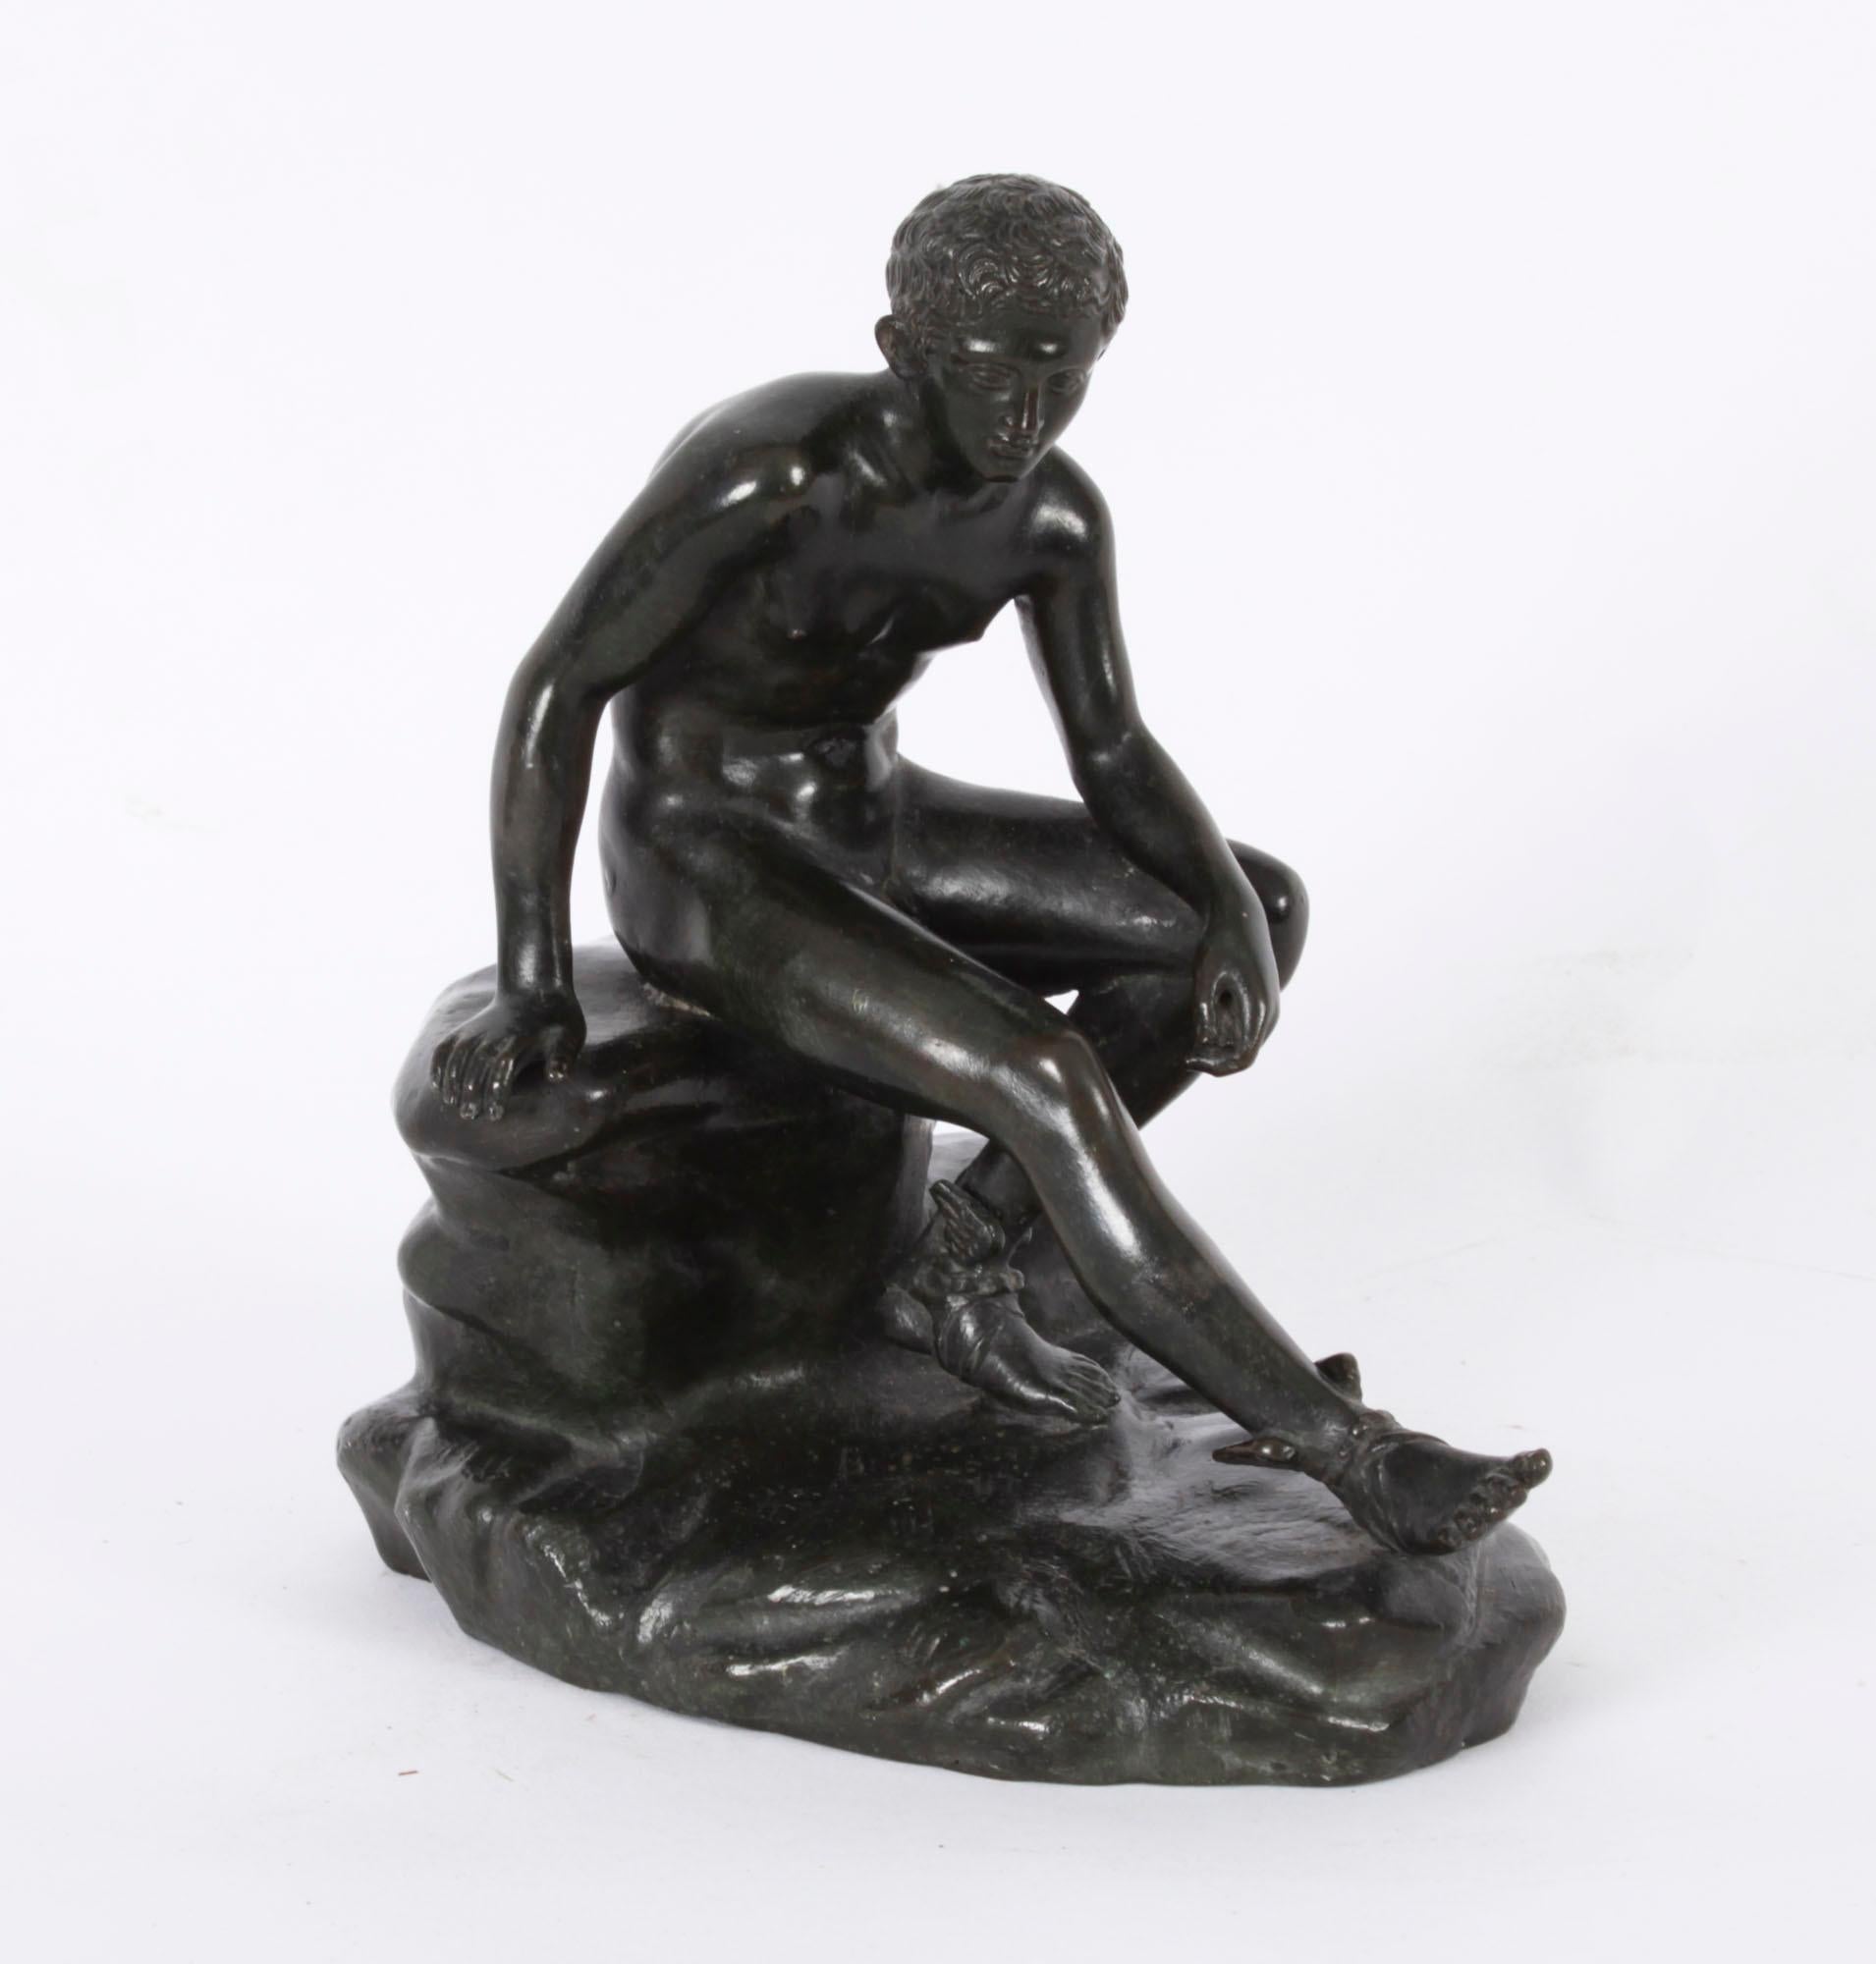 Antique Italian Bronze Sculpture Herme Naples Italy 19thC In Good Condition For Sale In London, GB